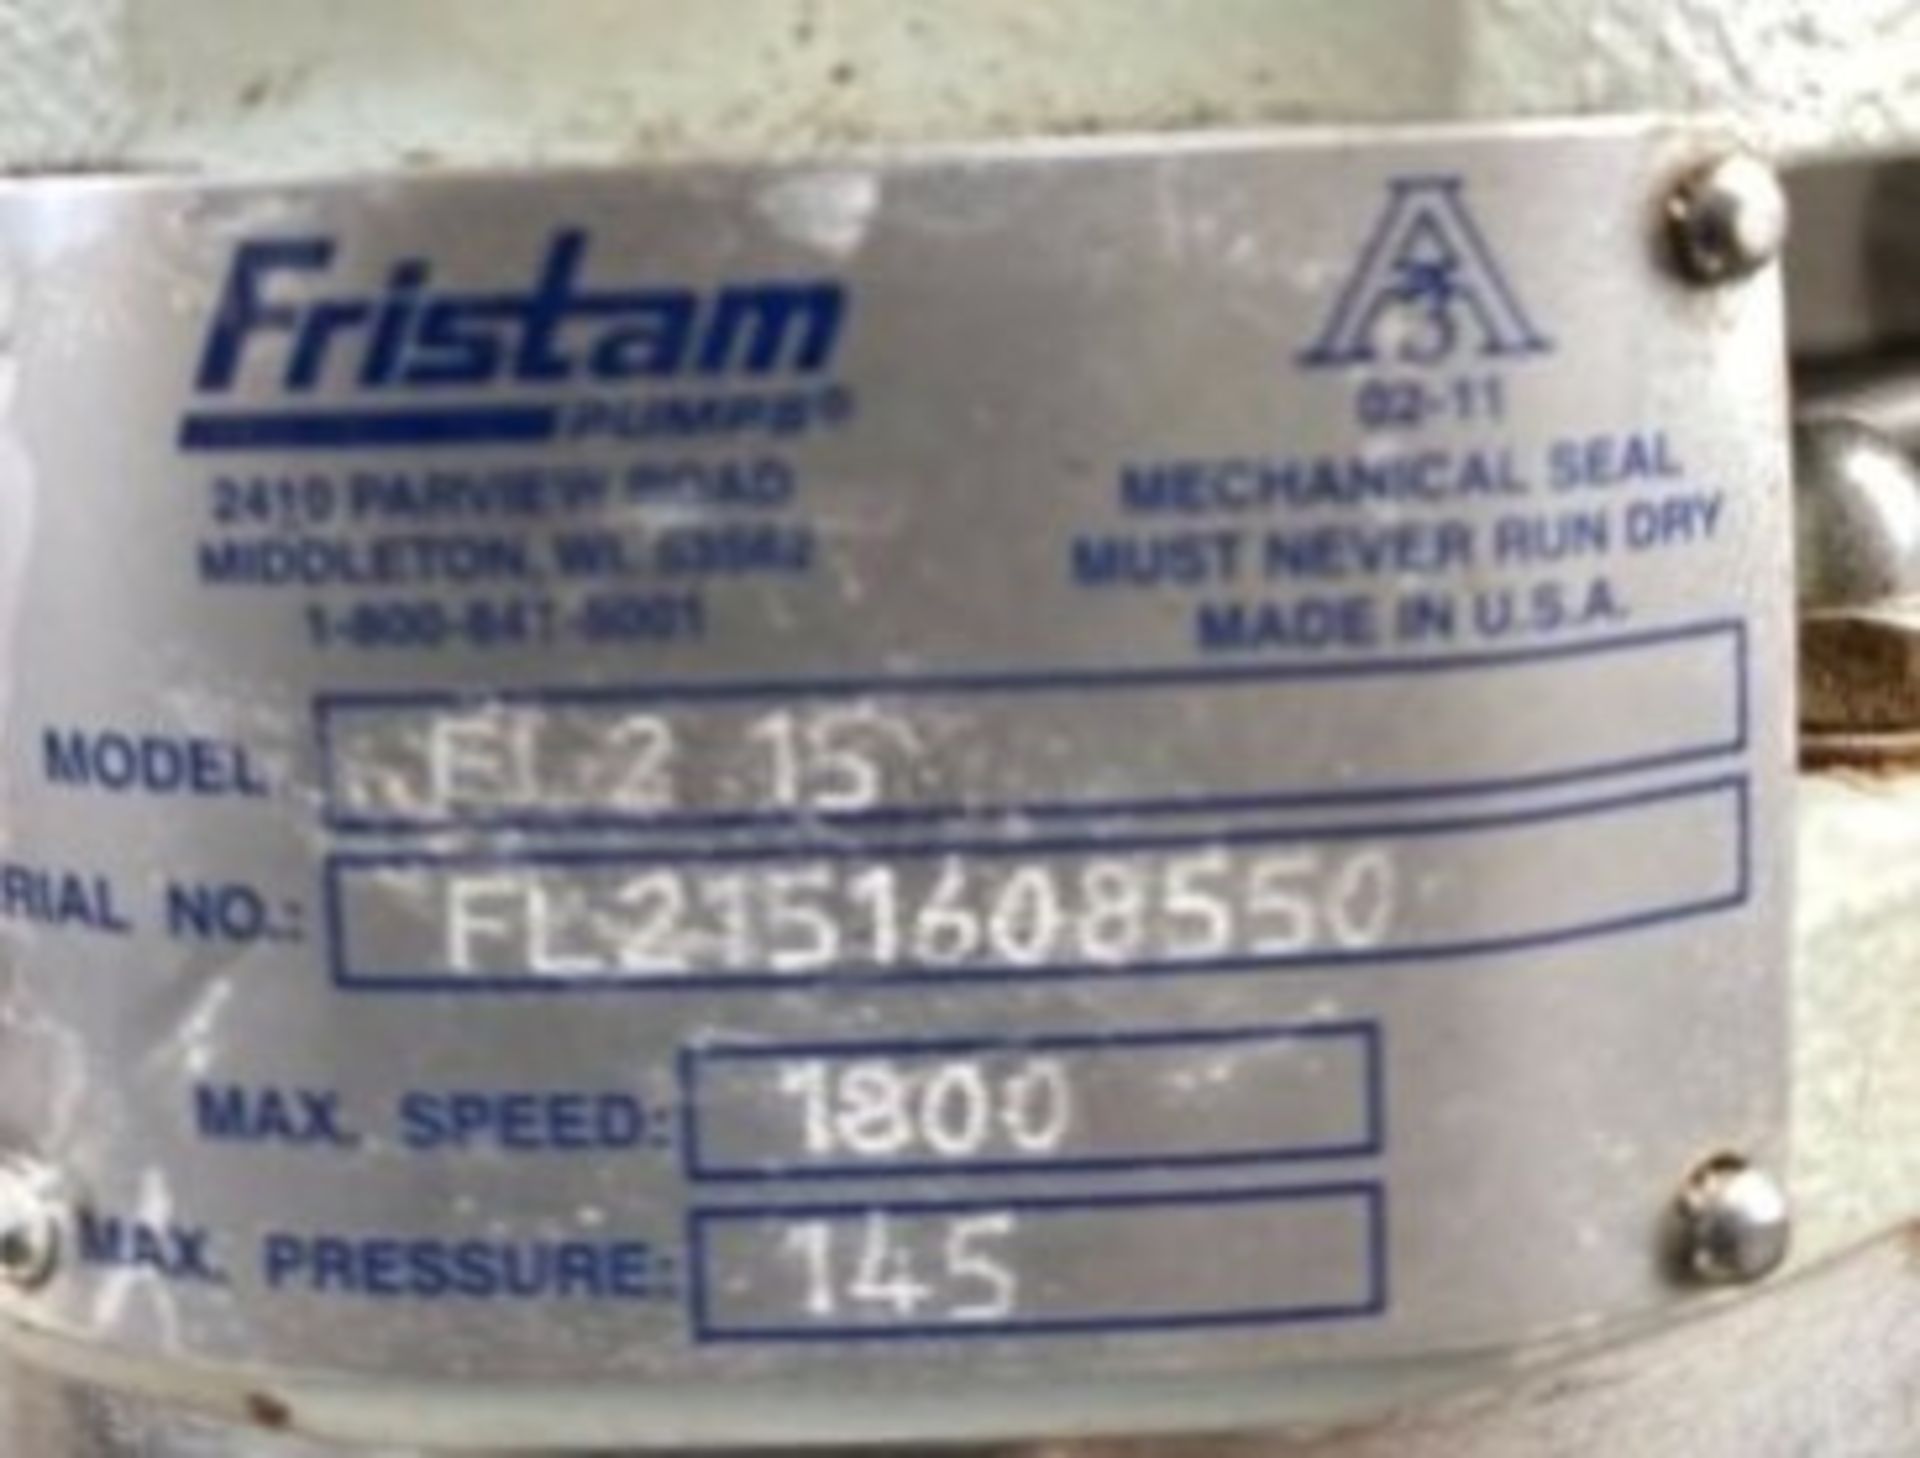 Fristam Positive Pump; Model: FL 215 with 1"/1"; Last Used in Food (Loading Fee $100) FOB HIALEAH FL - Image 4 of 5